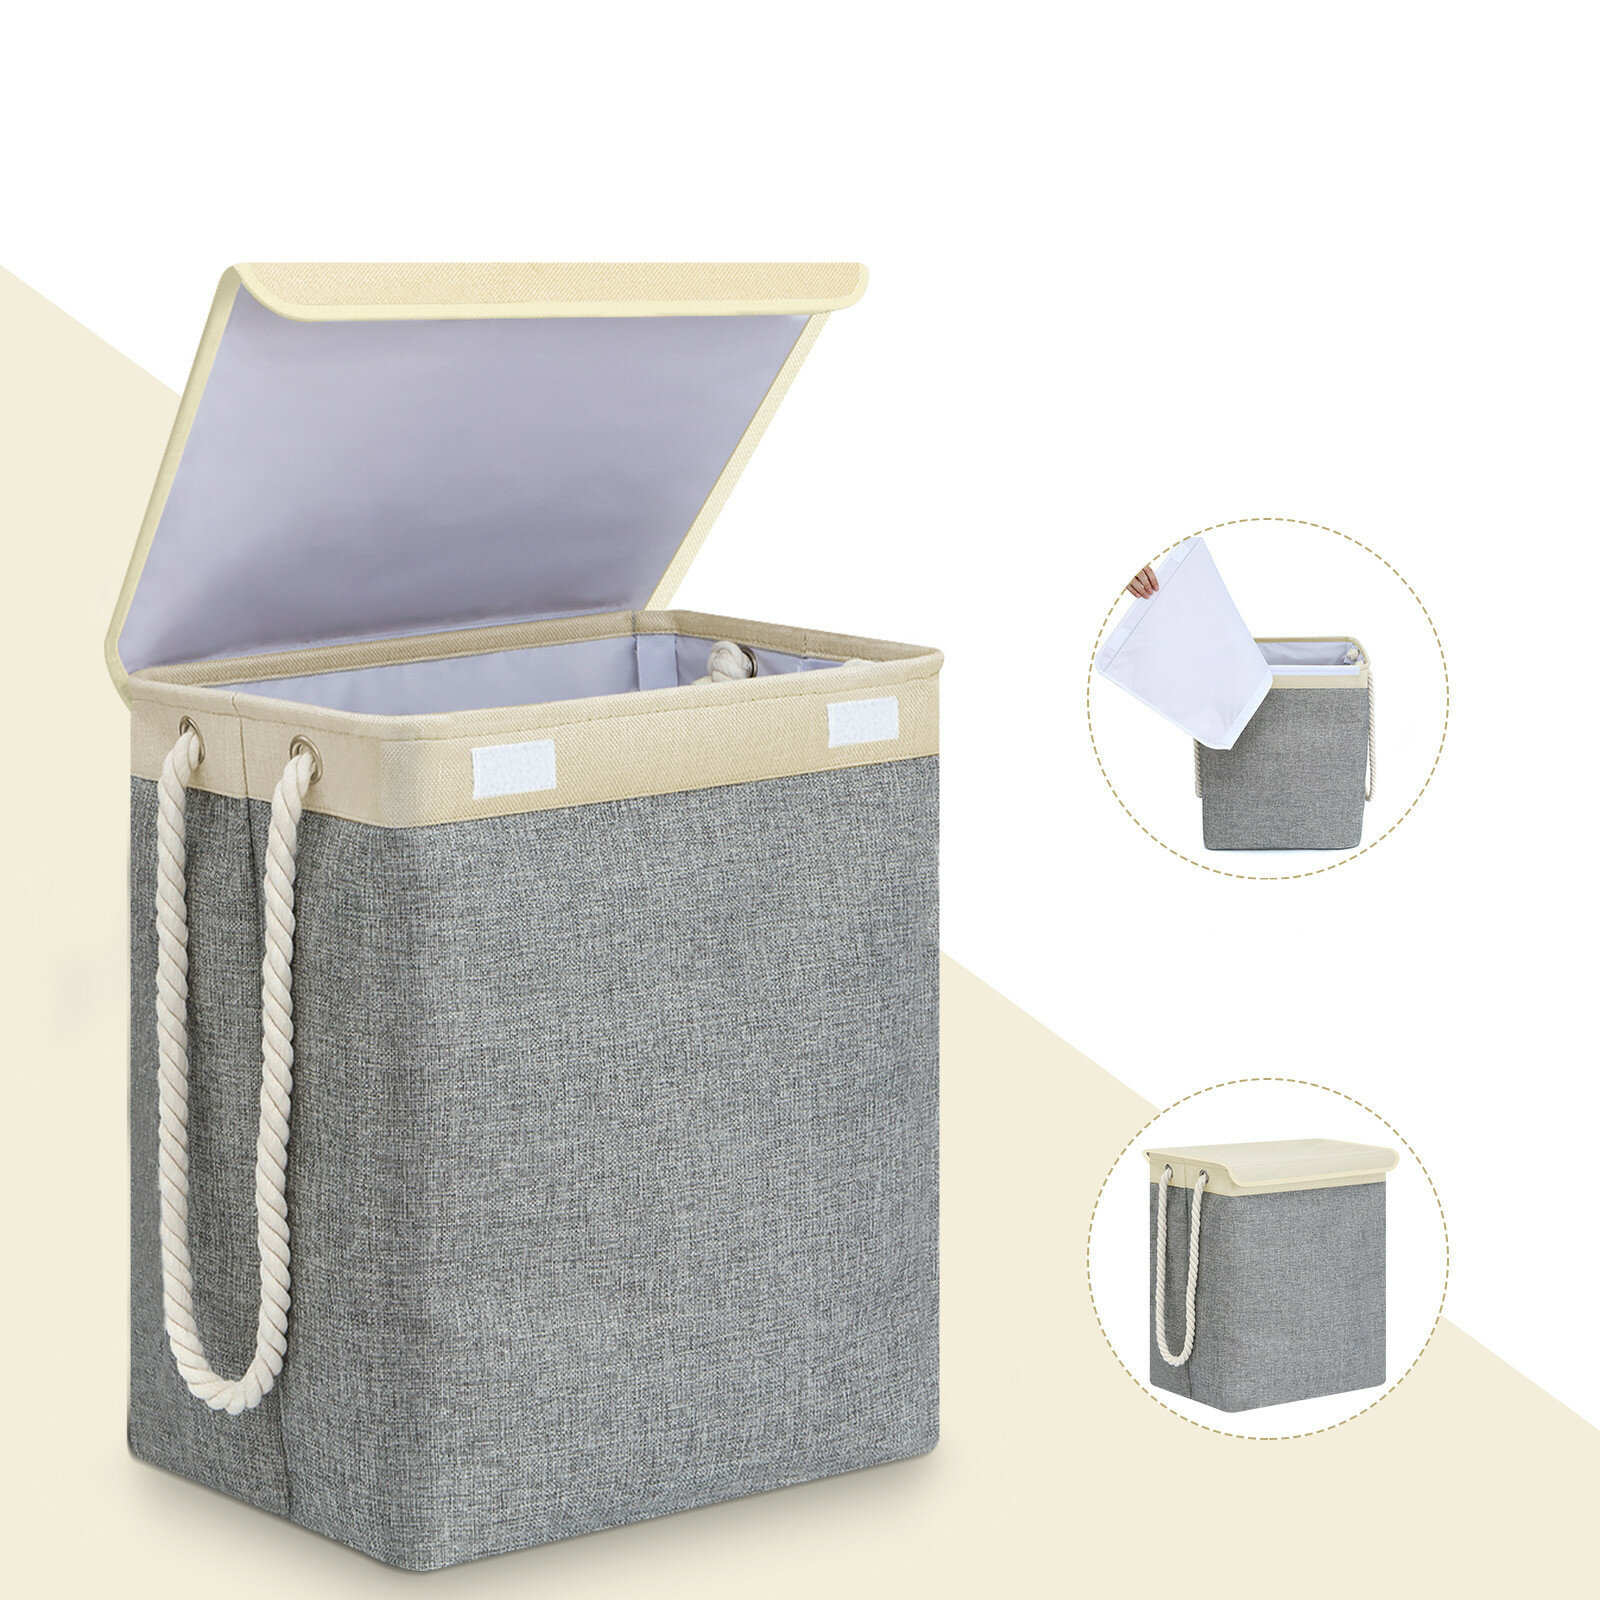 SAWAKE Laundry Basket with Lid Large Linen Collapsible Laundry Hamper with Handles Waterproof Lining Detachable Brackets